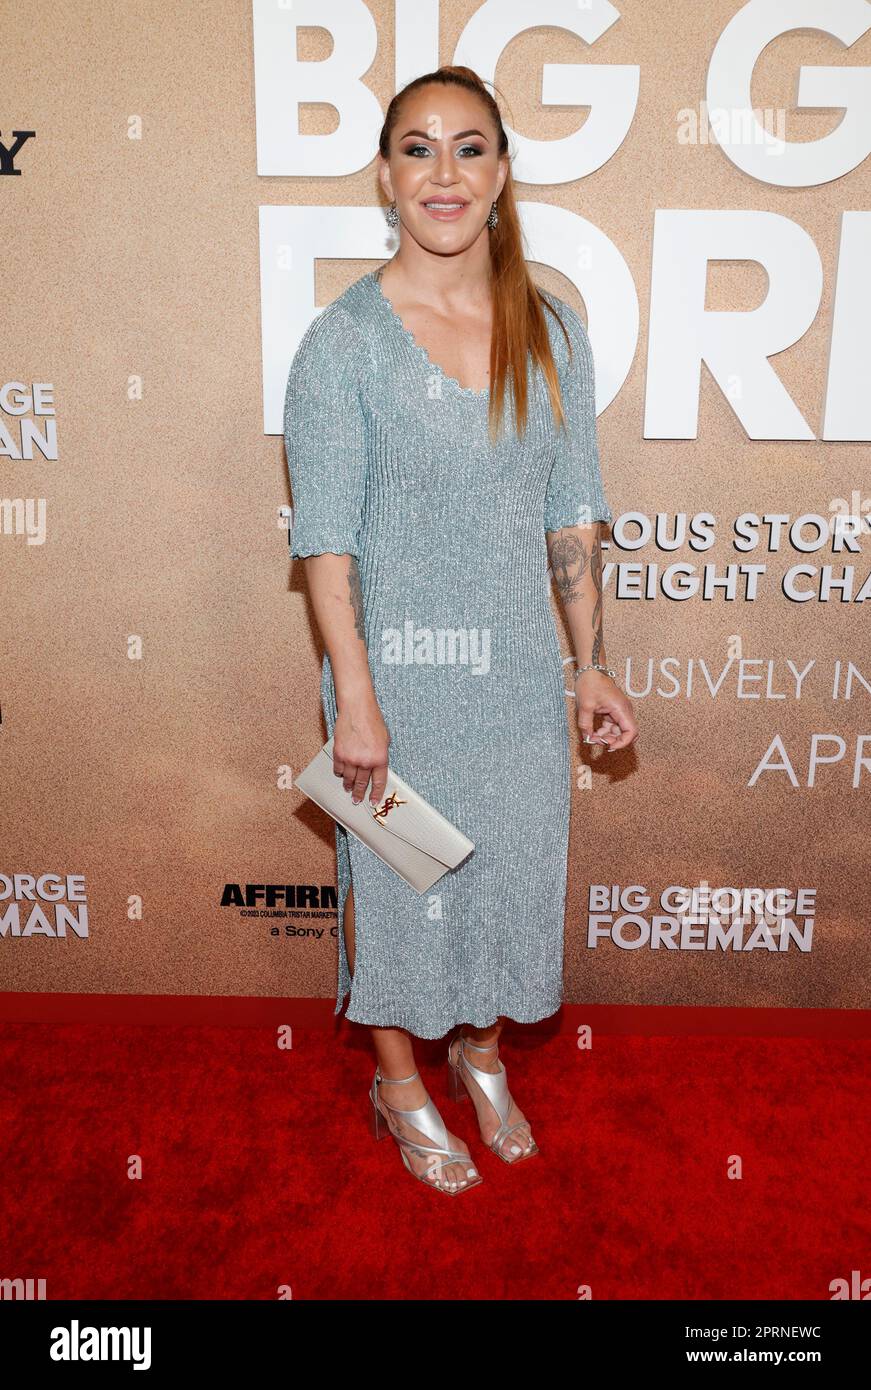 Los Angeles, Ca. 26. April 2023. Cris Cyborg auf der Weltpremiere von Affirm Films und Sony Pictures Entertainment Big George Foreman: The Wunderful Story of the Once and Future Heavyweight Champion of the World am 26. April 2023 bei Regal La Live in Los Angeles, Kalifornien. Kredit: Faye Sadou/Media Punch/Alamy Live News Stockfoto